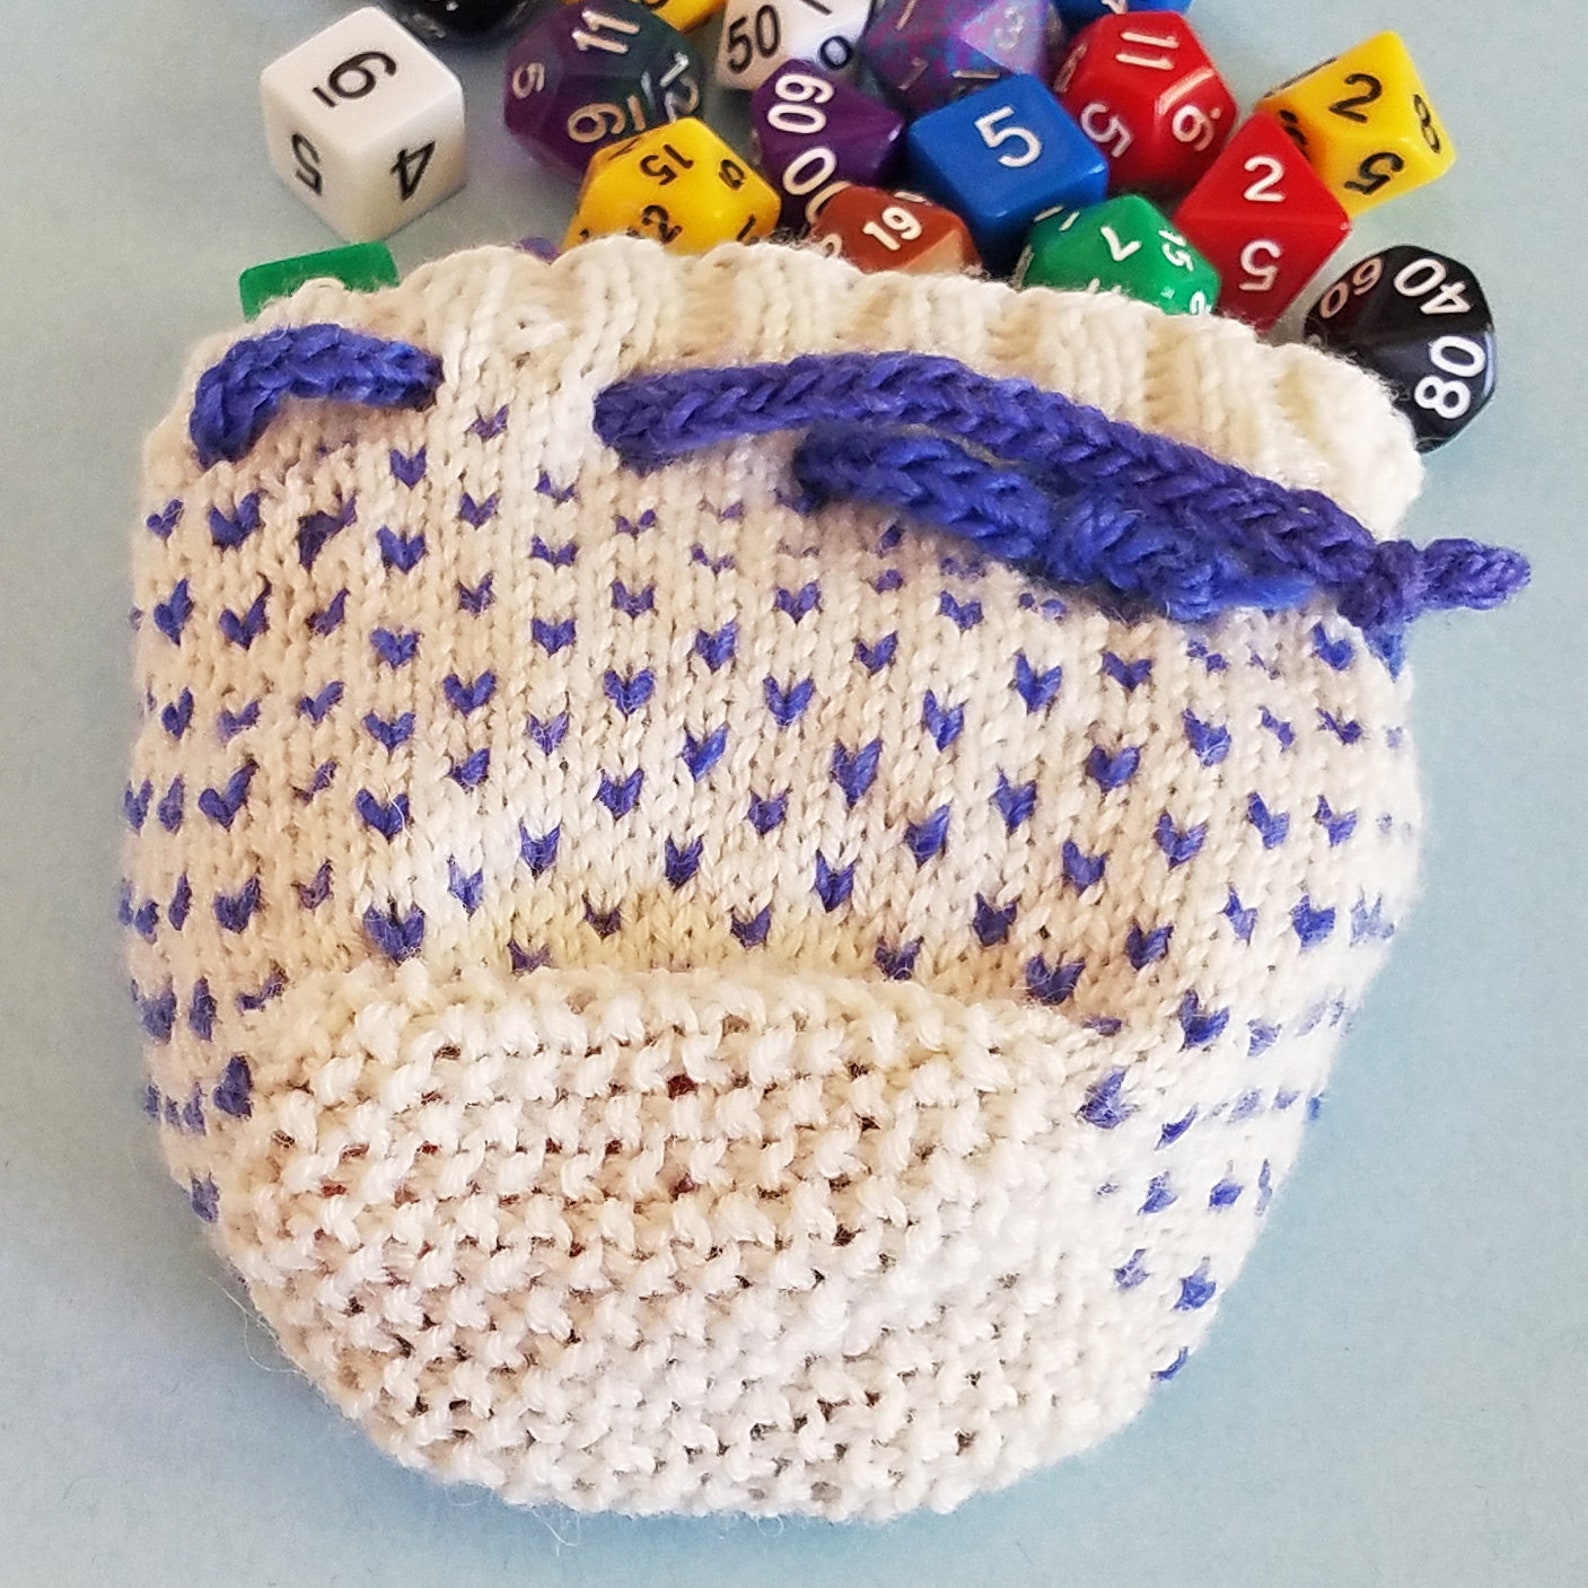 knitted-dice-bag-small-size-white-bag-with-blue-star-pattern-etsy